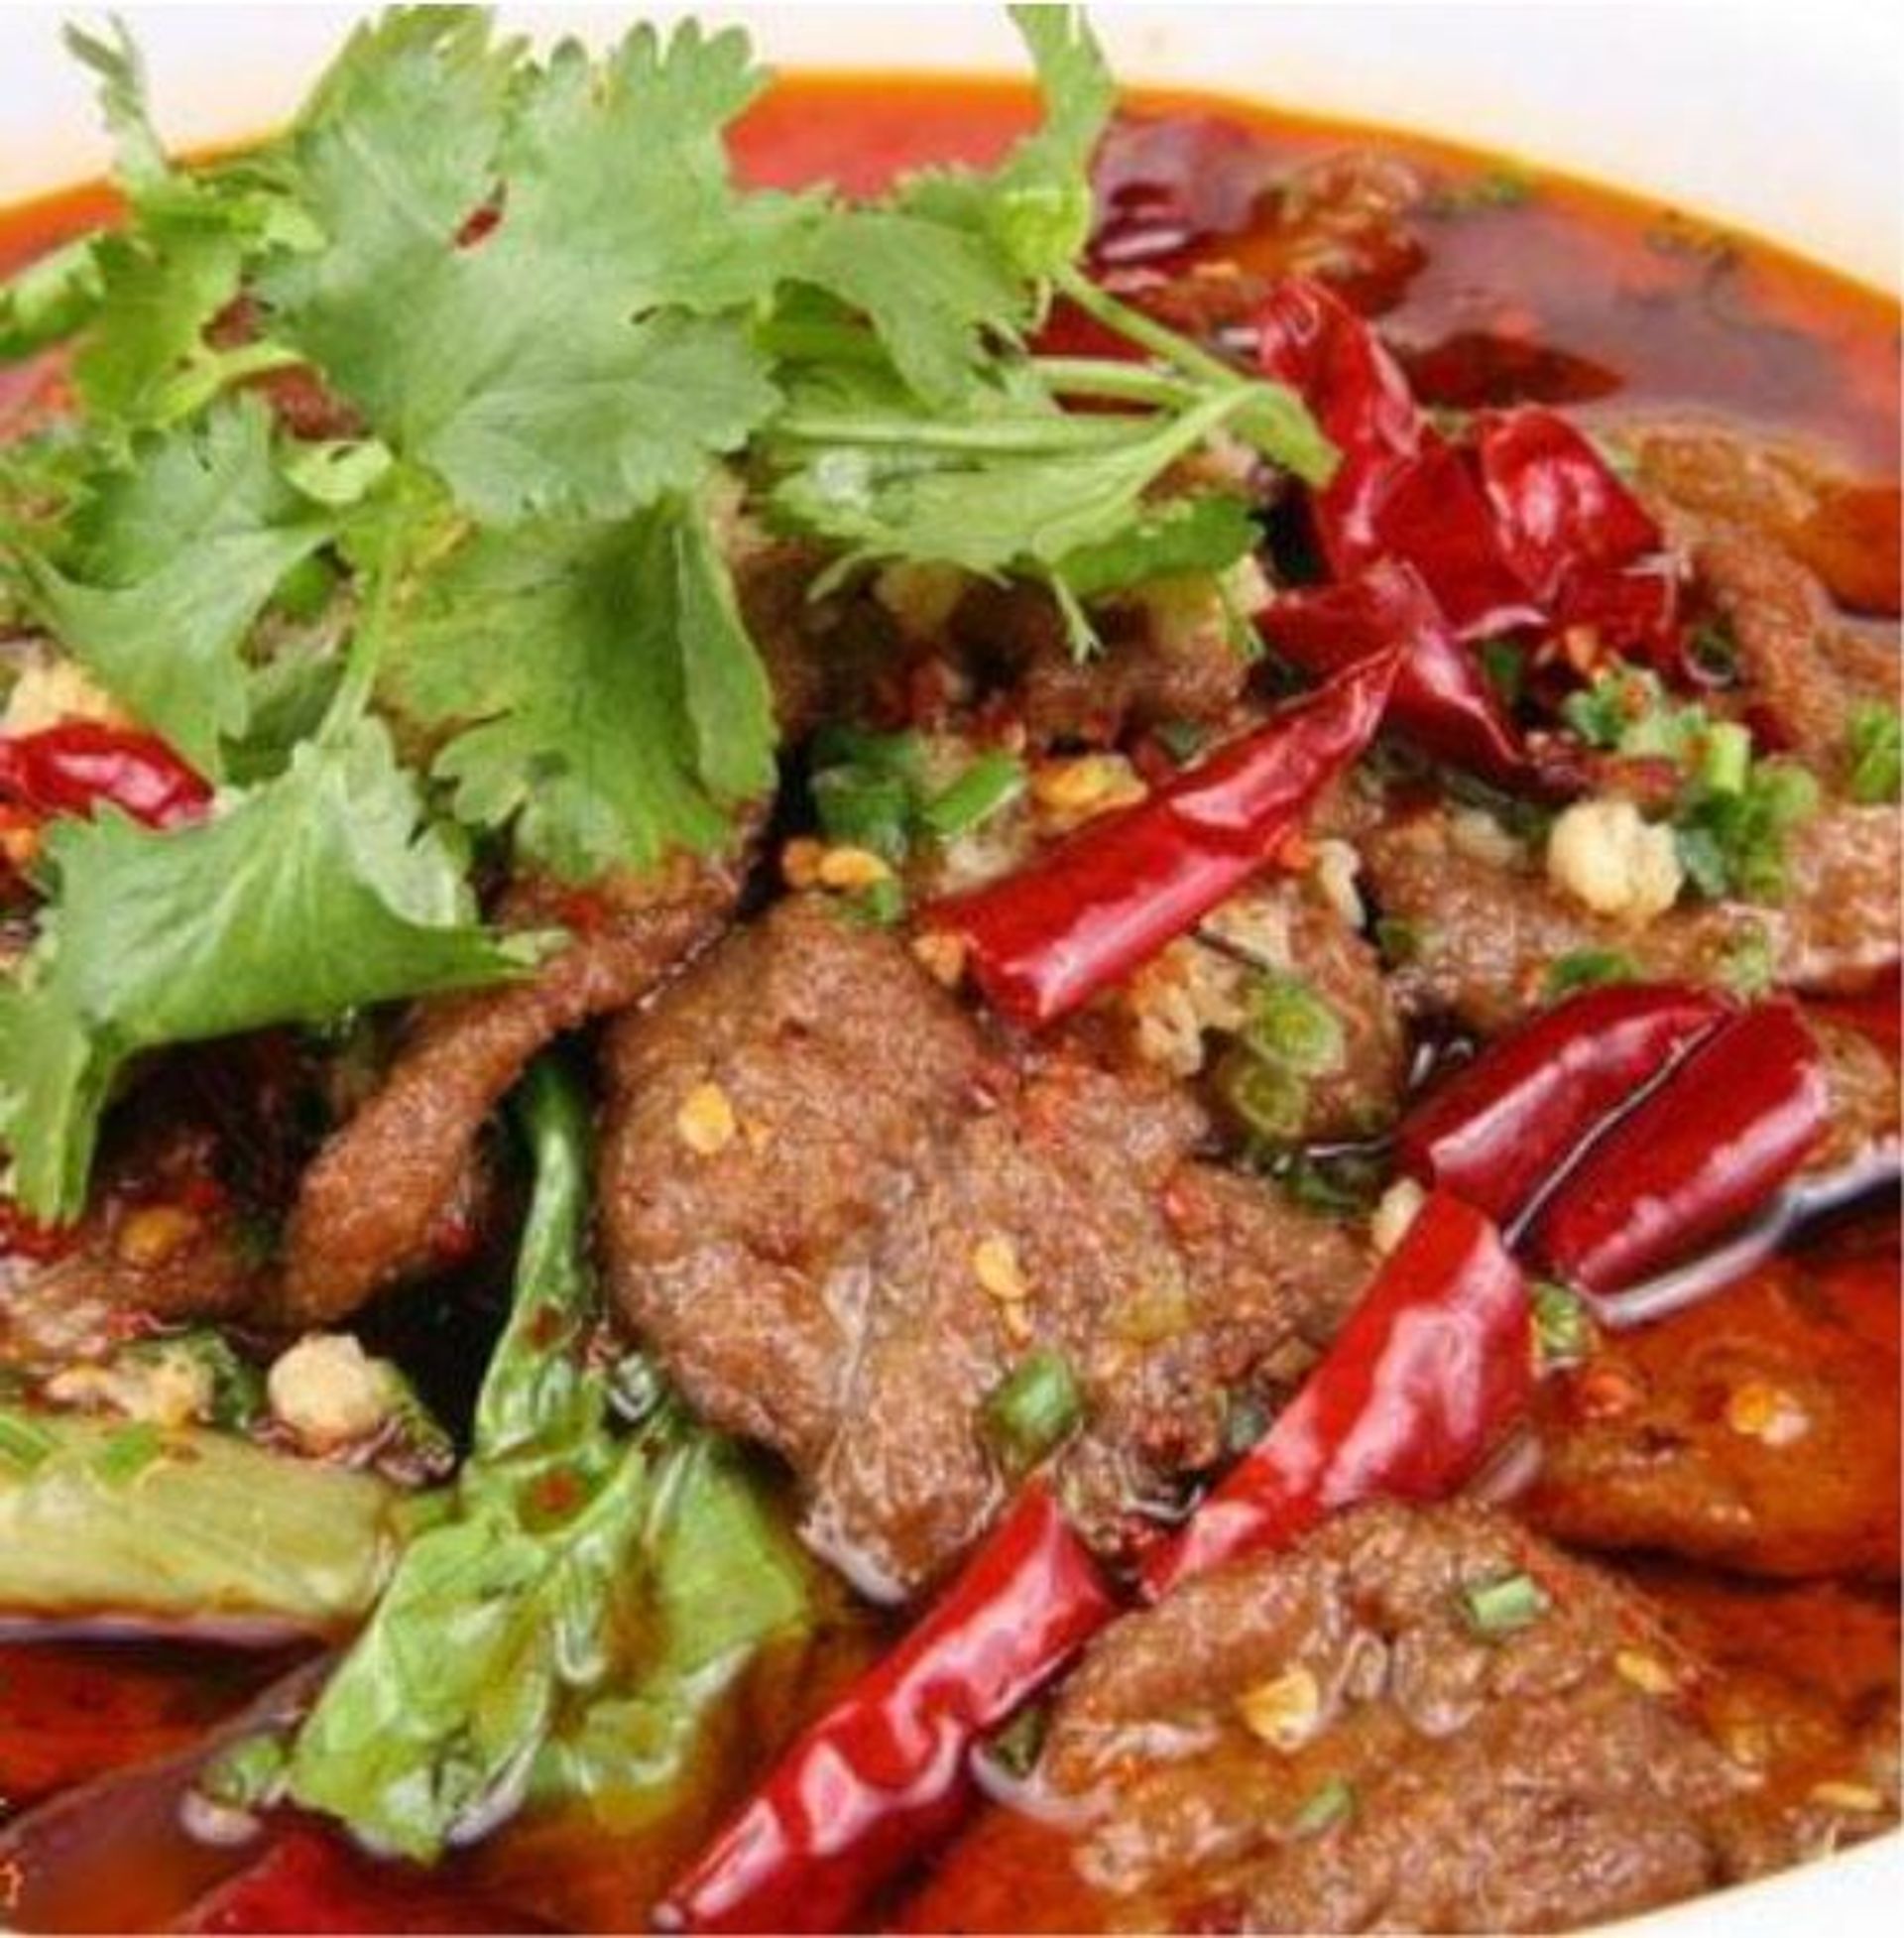 Sliced Beef in Spicy Broth